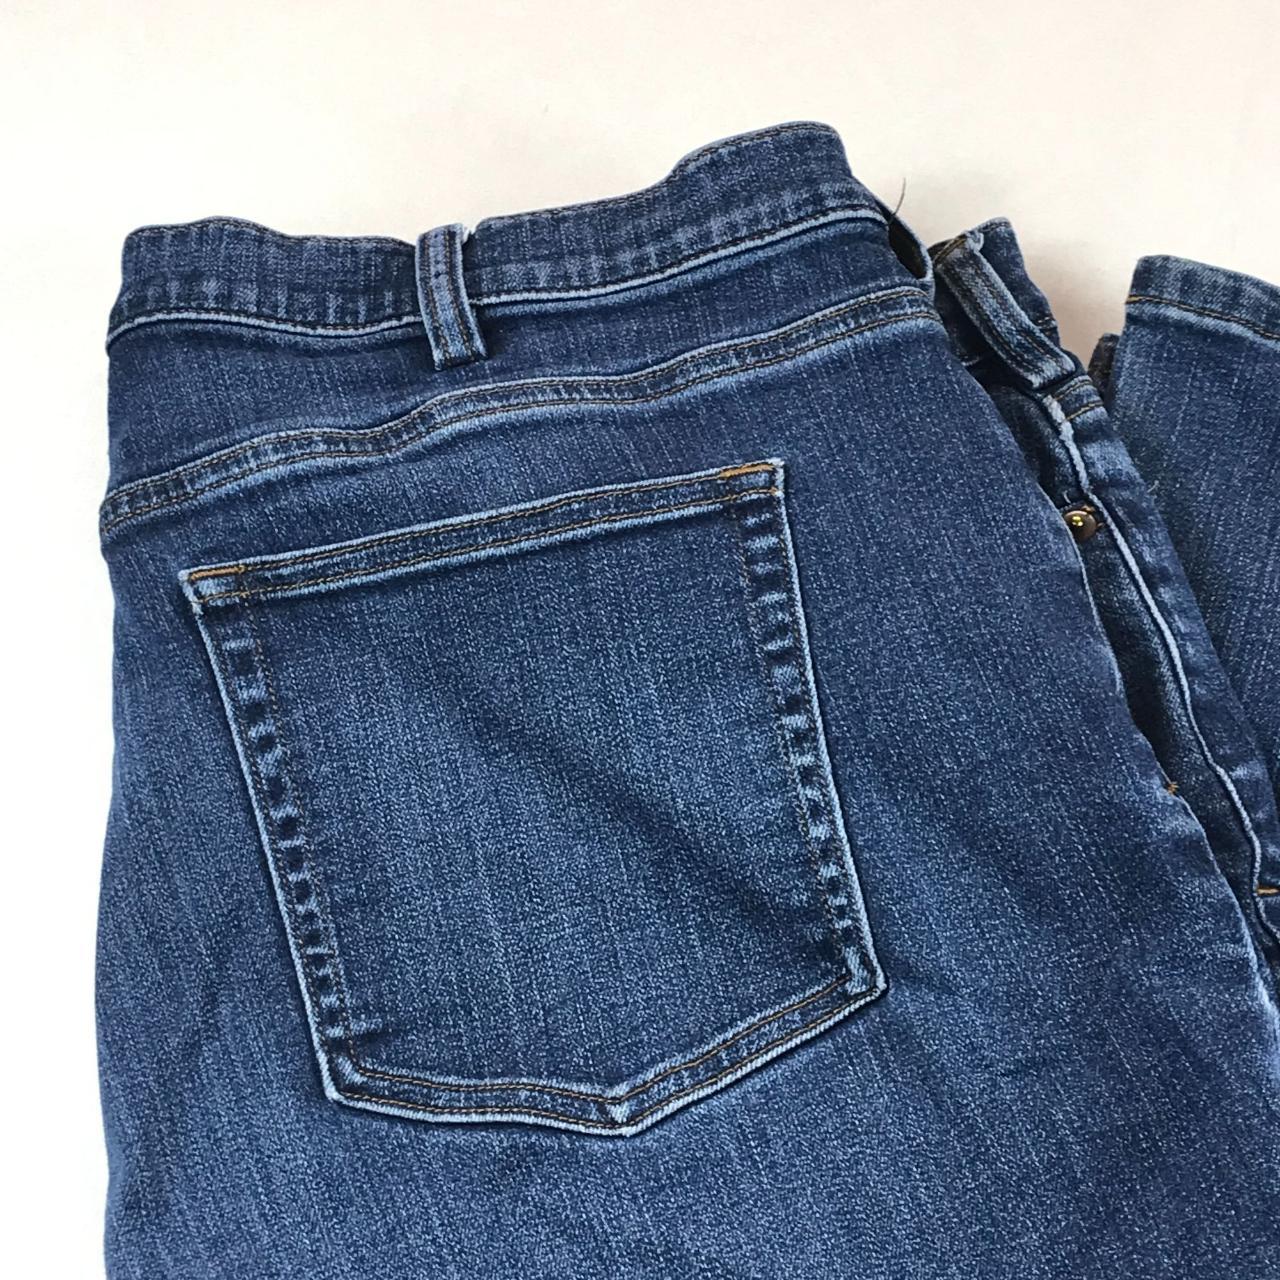 Duluth Trading Co Womens Bootcut Jeans Size 18... - Depop